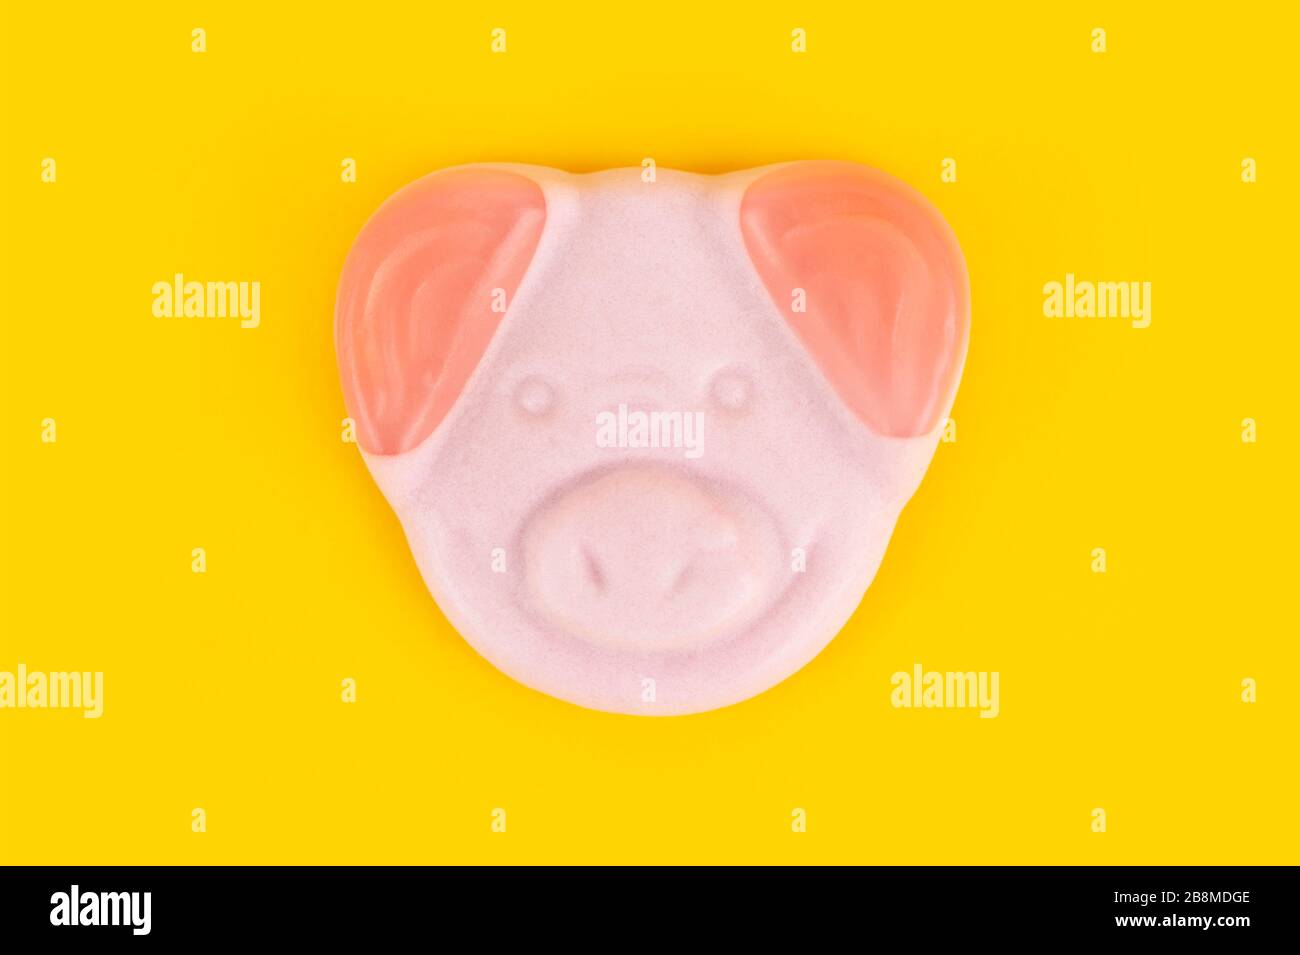 An M&S Percy Pig sweet shot on a yellow background. Stock Photo